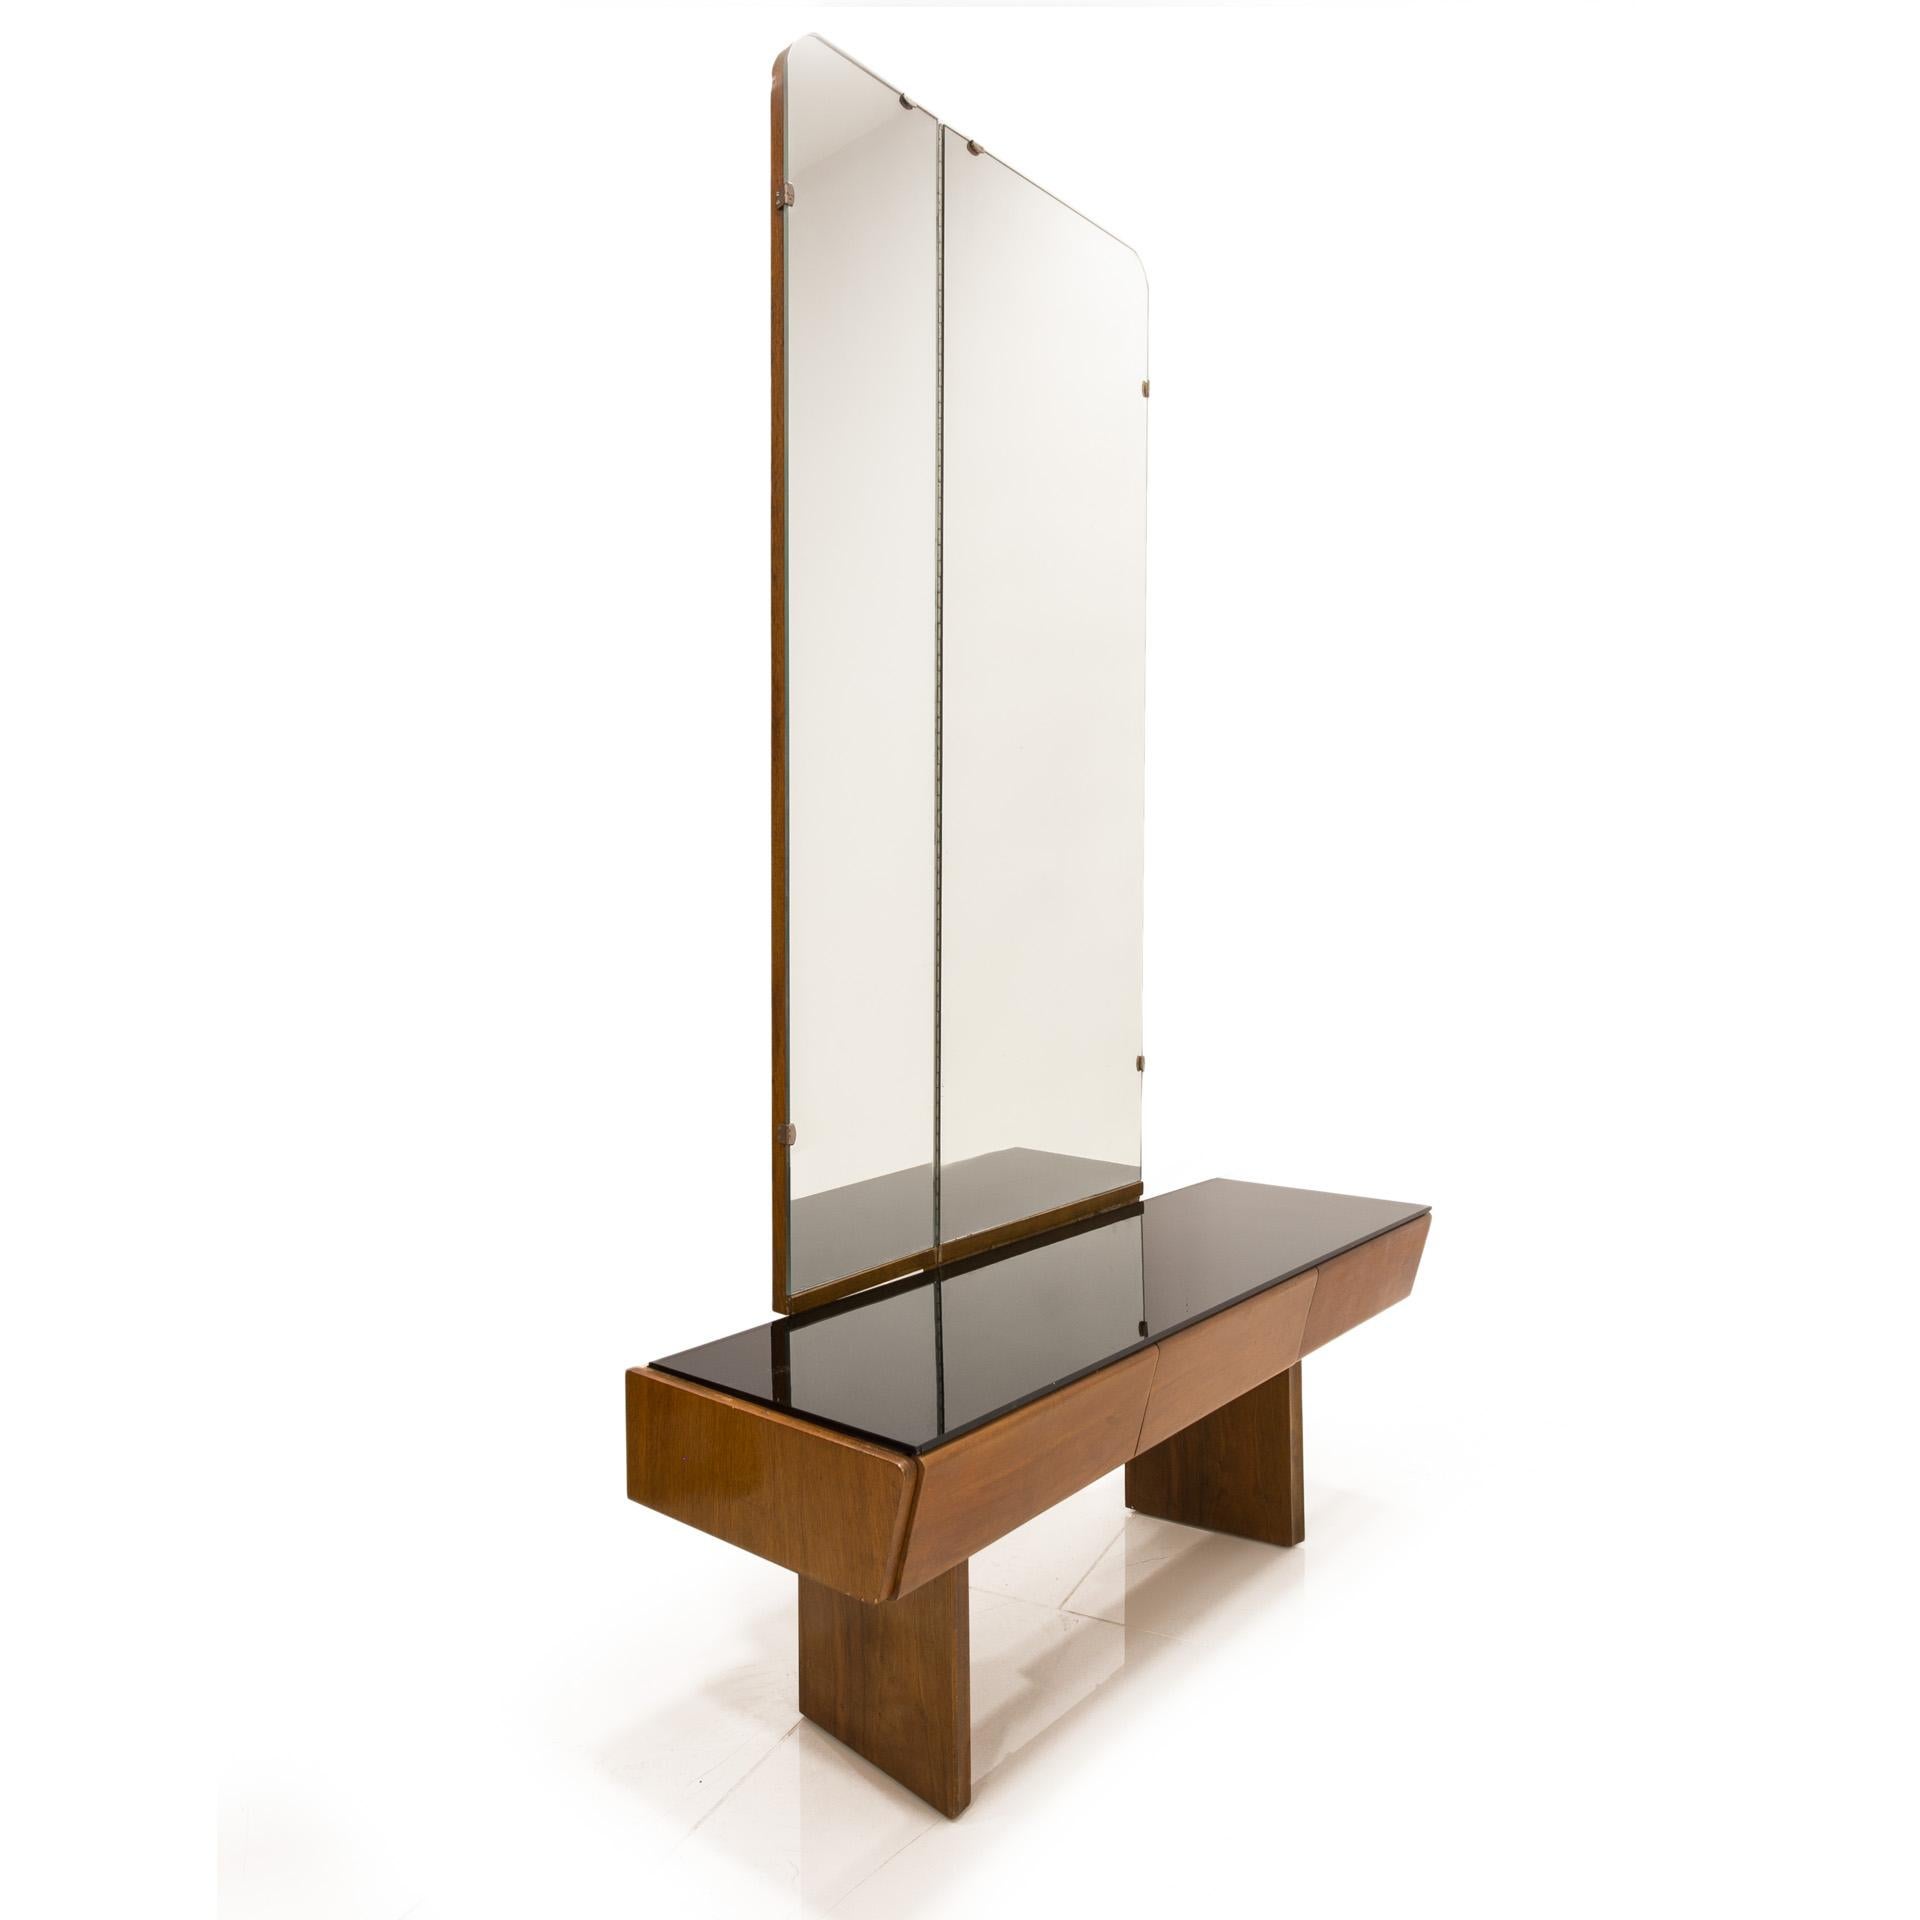 This dressing table was designed by famous Czech designer Jindrich Halabala and manufactured around 1930s. The piece is in very good original condition. It features a big vertical mirror and 3 practical drawers that provide lots of storage space.